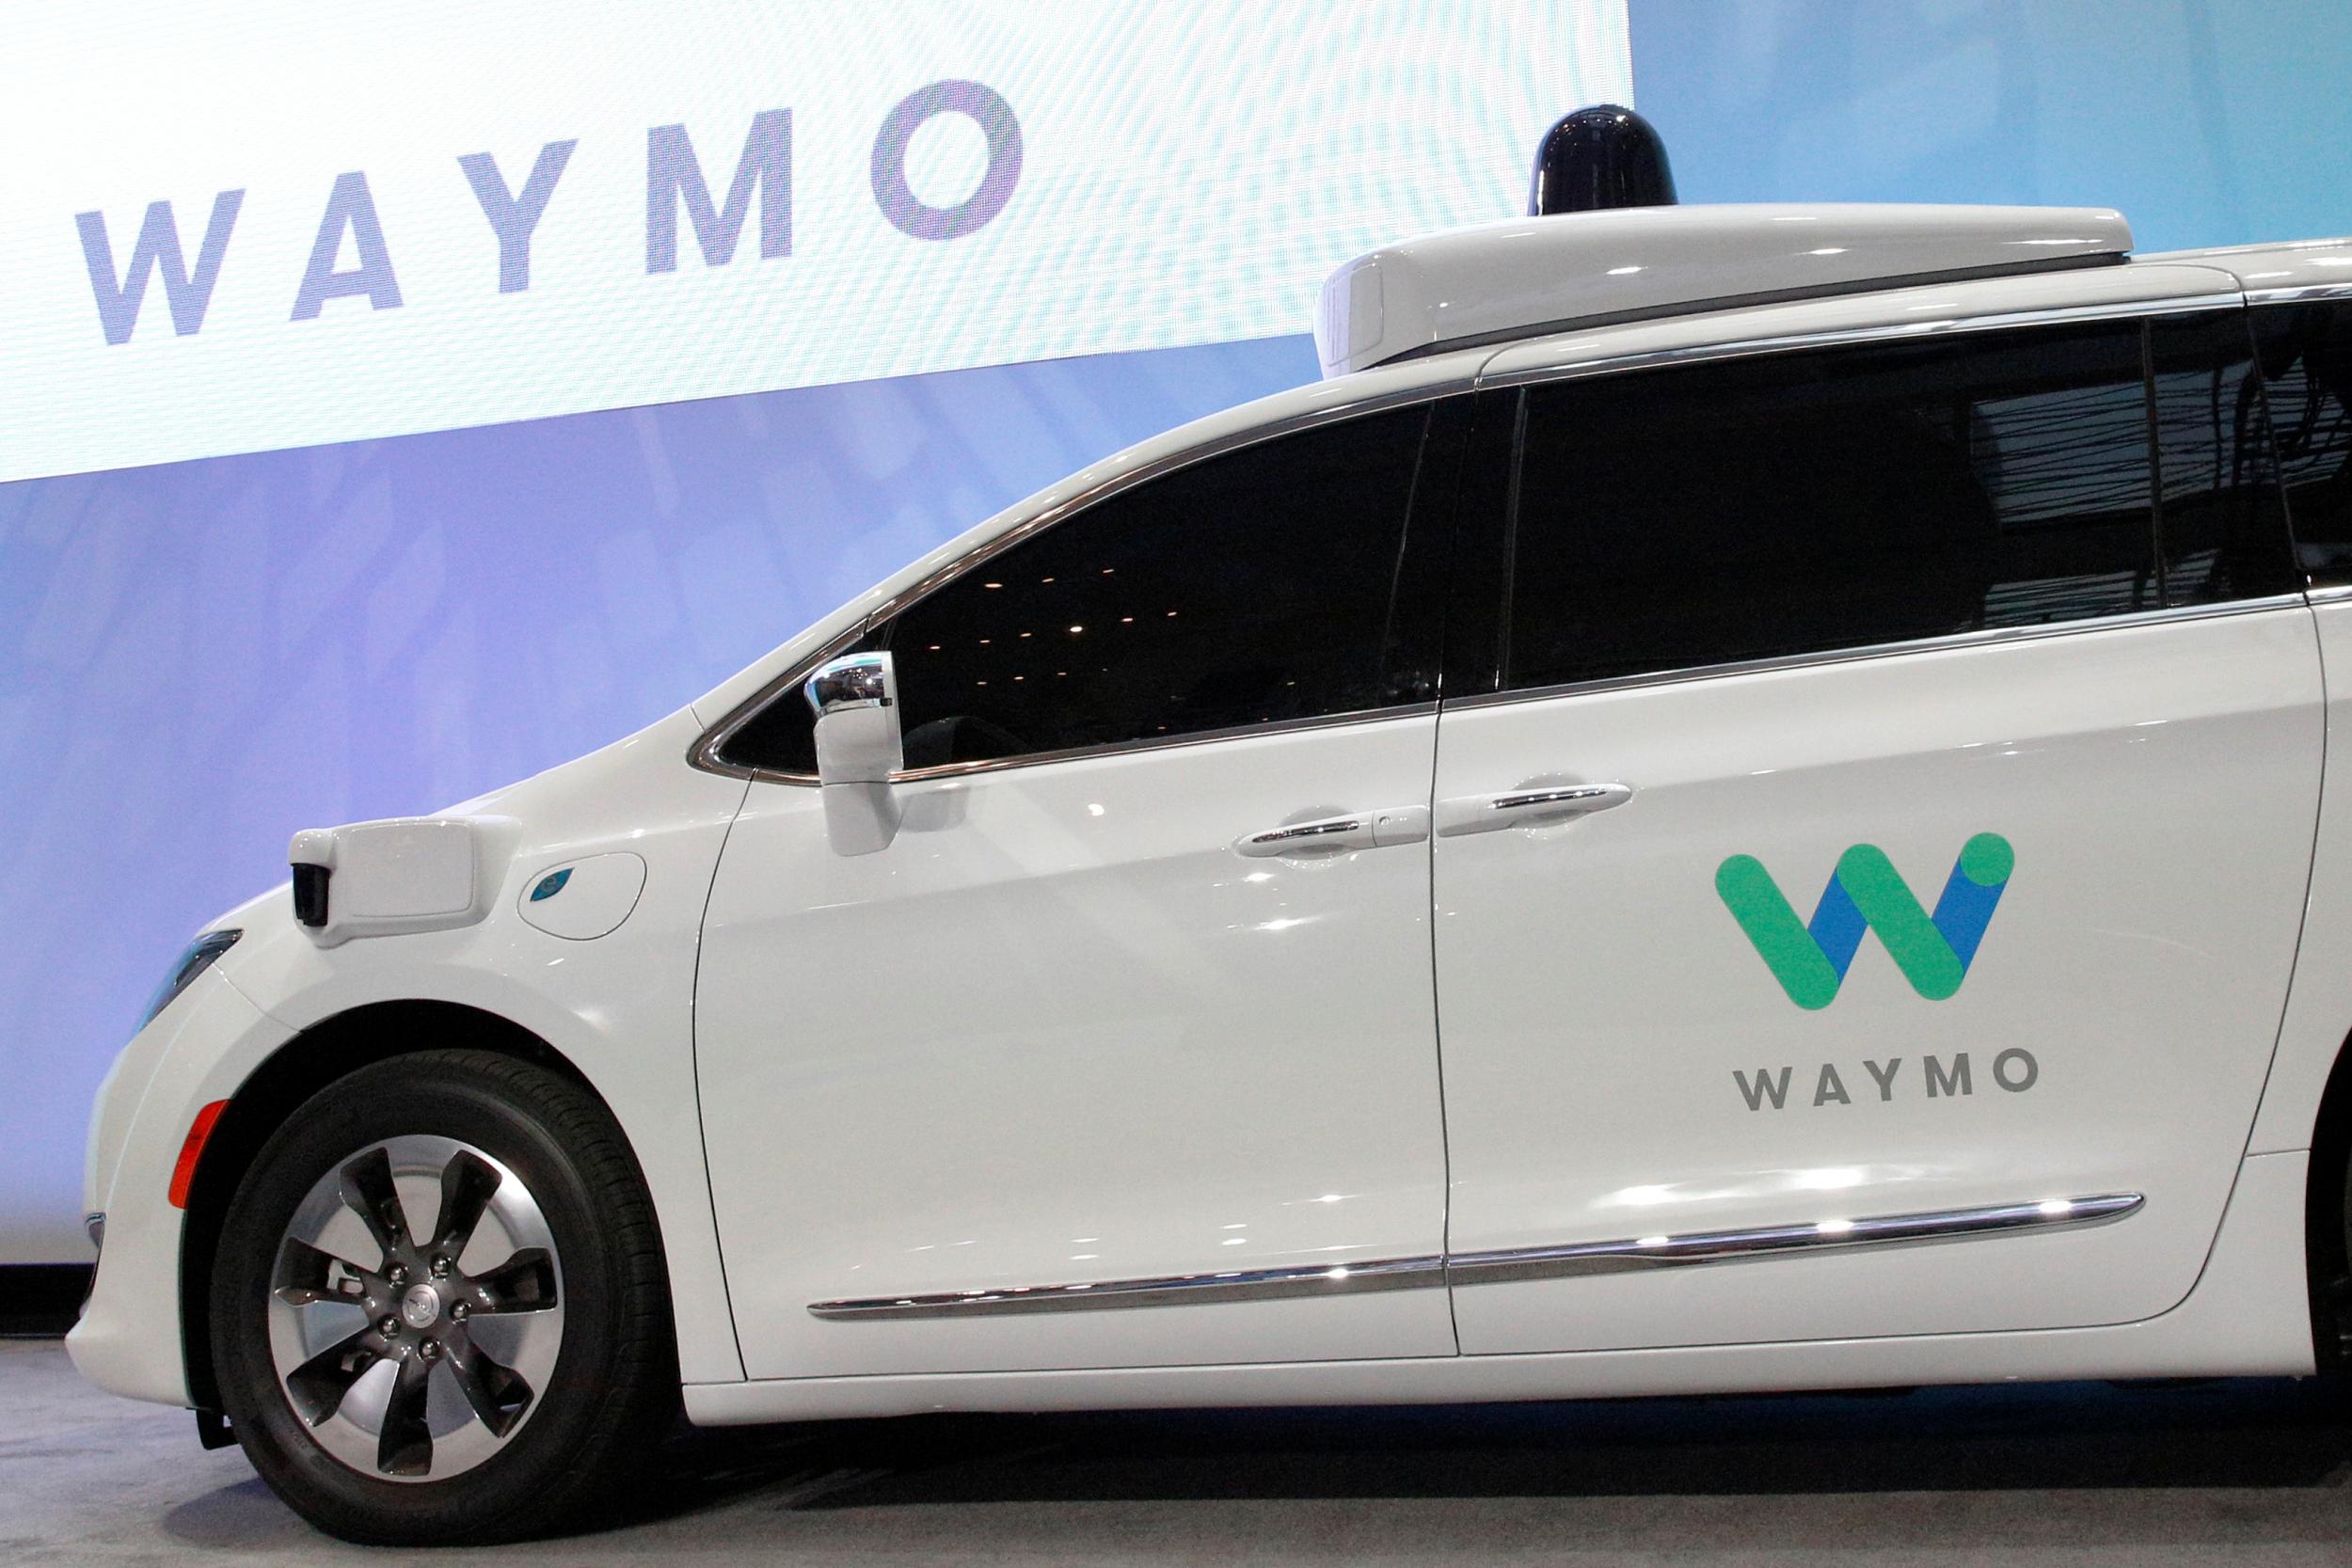 Alphabet's self driving car unit says it recently learned that former employees took Waymo source code when they went to work at Uber, which is denied by the ride-hailing firm